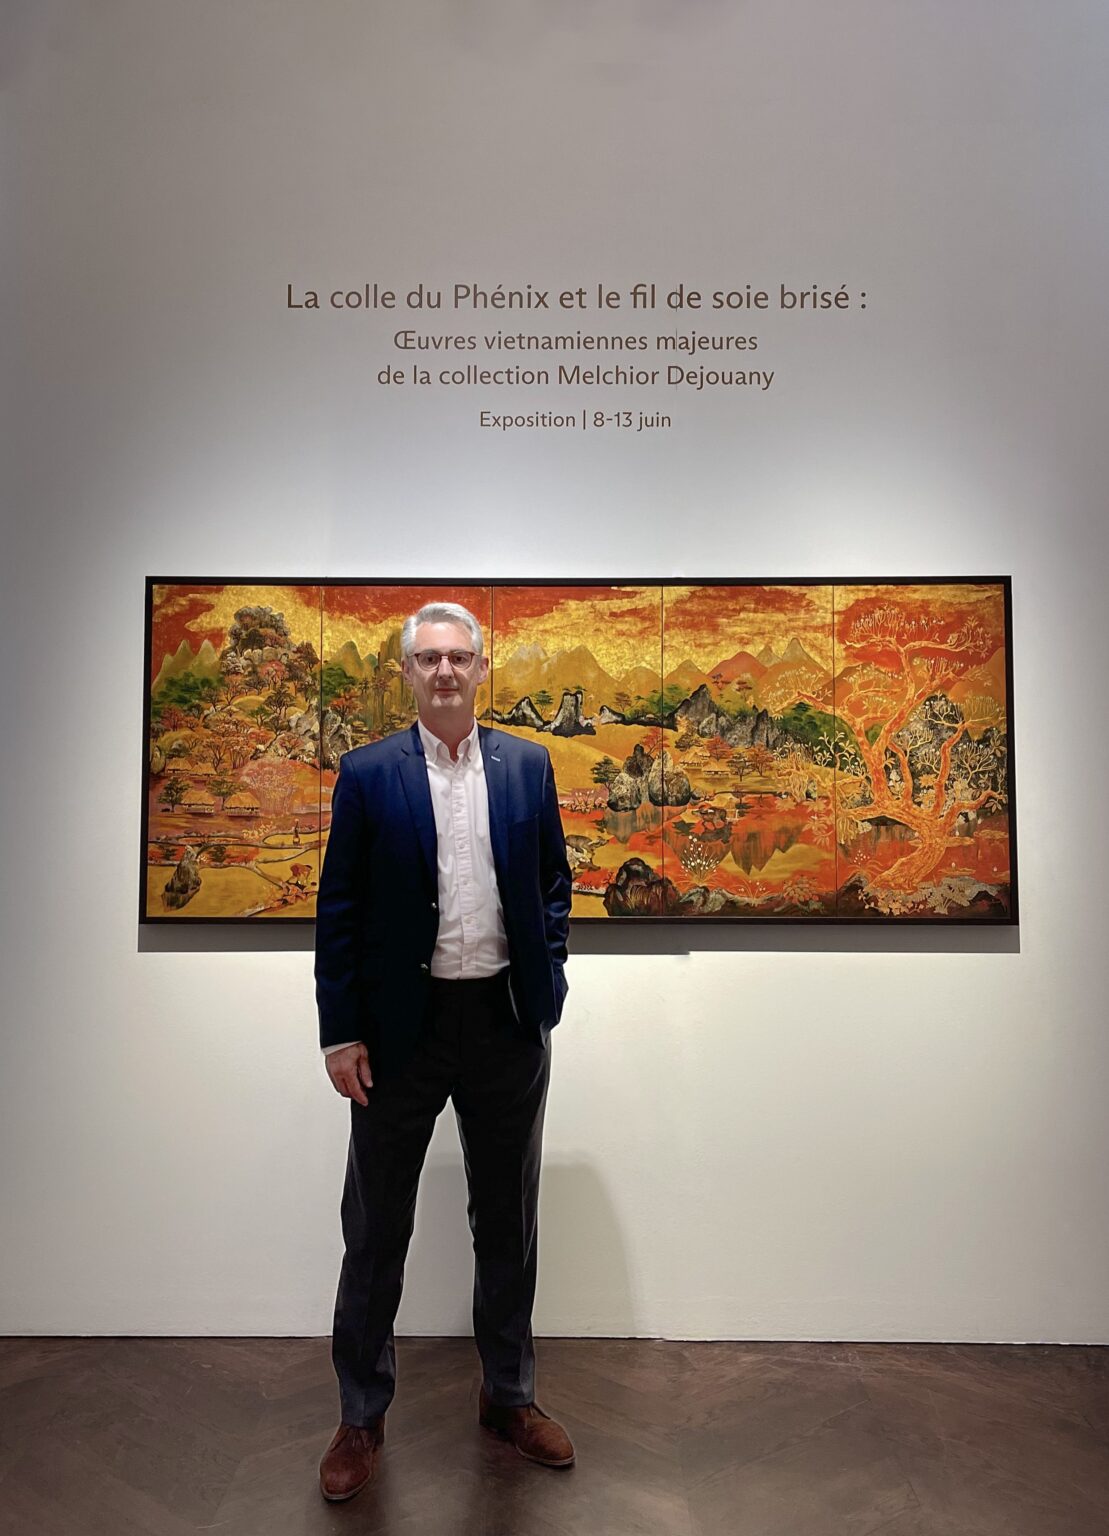 Collector Melchior Dejouany posing at Christie's: The Melchior Dejouany Collection: 'The Phoenix Glue and the Broken Silk Thread', Christie's Paris, 8-12 June 2024.
Courtesy: thucdoan.com